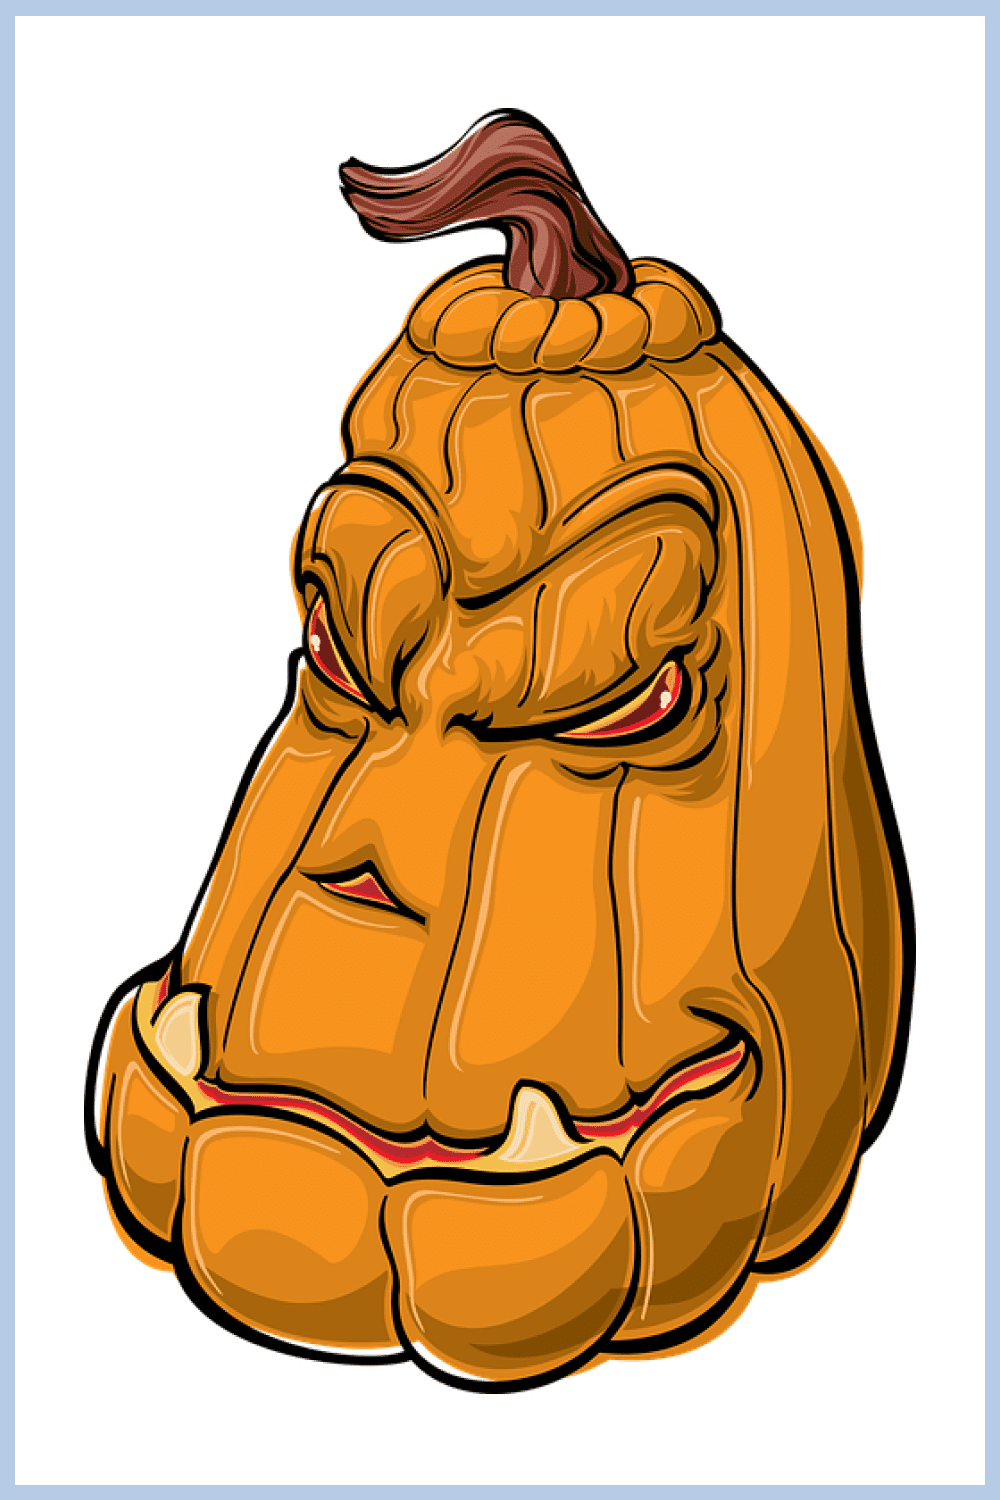 Holly-leaved evil pumpkin is ready to scare kids on Halloween.